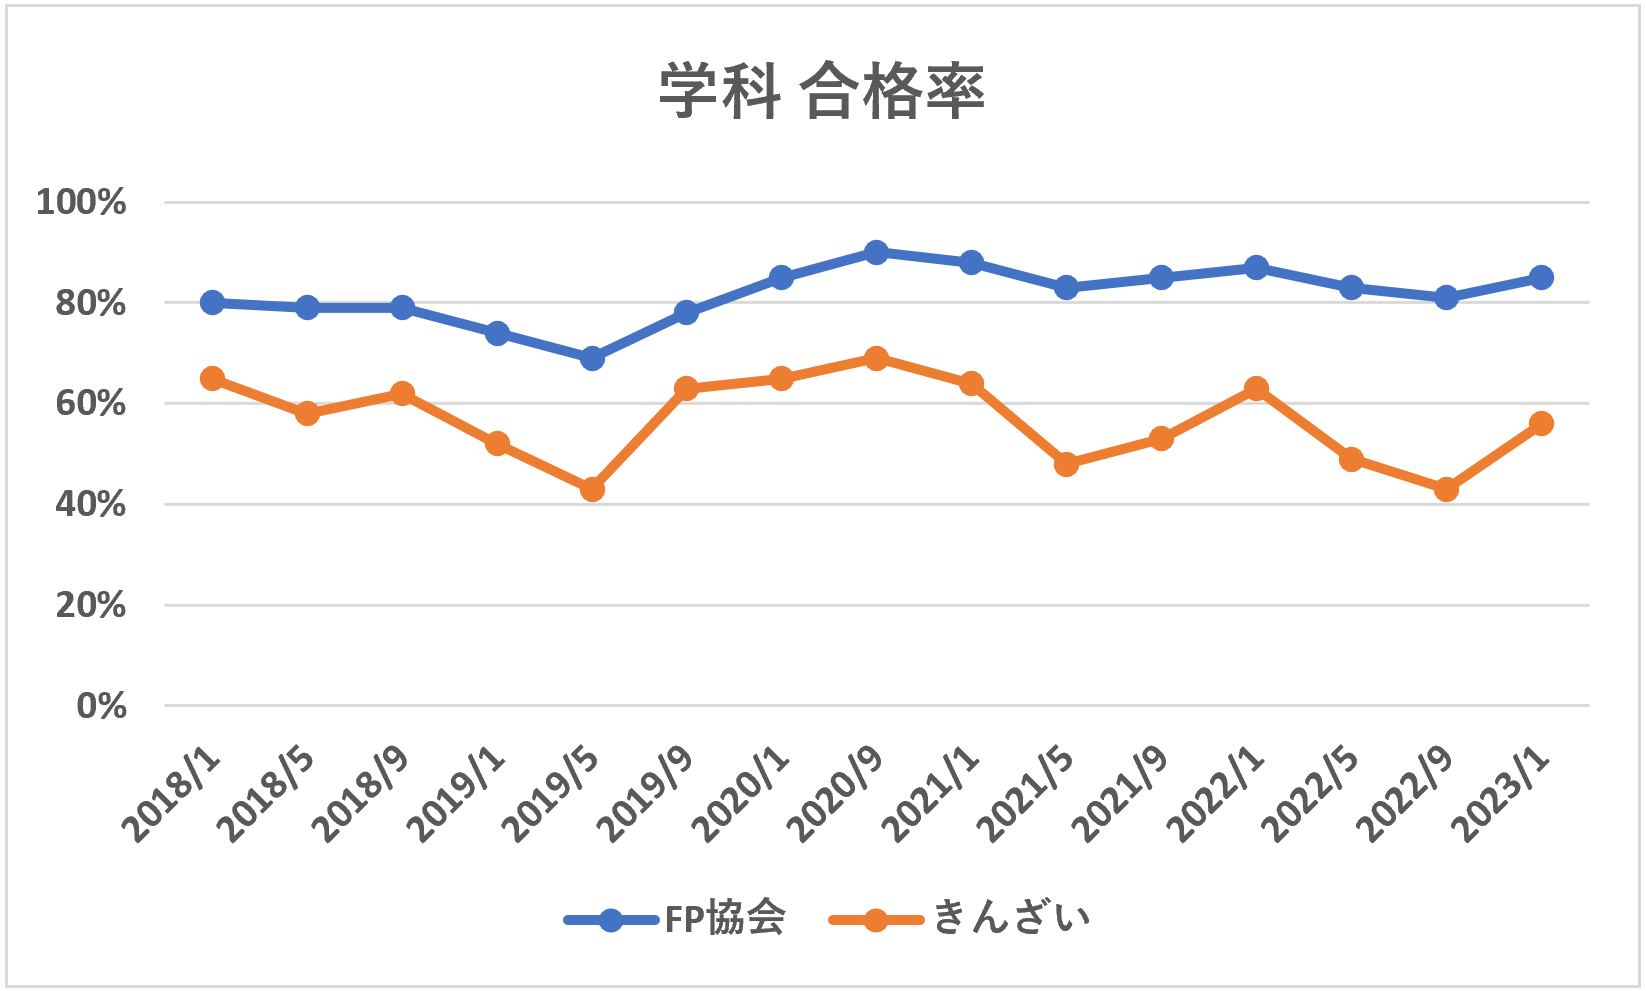 FP3級学科試験合格率推移（2018年1月から2023年1月まで）